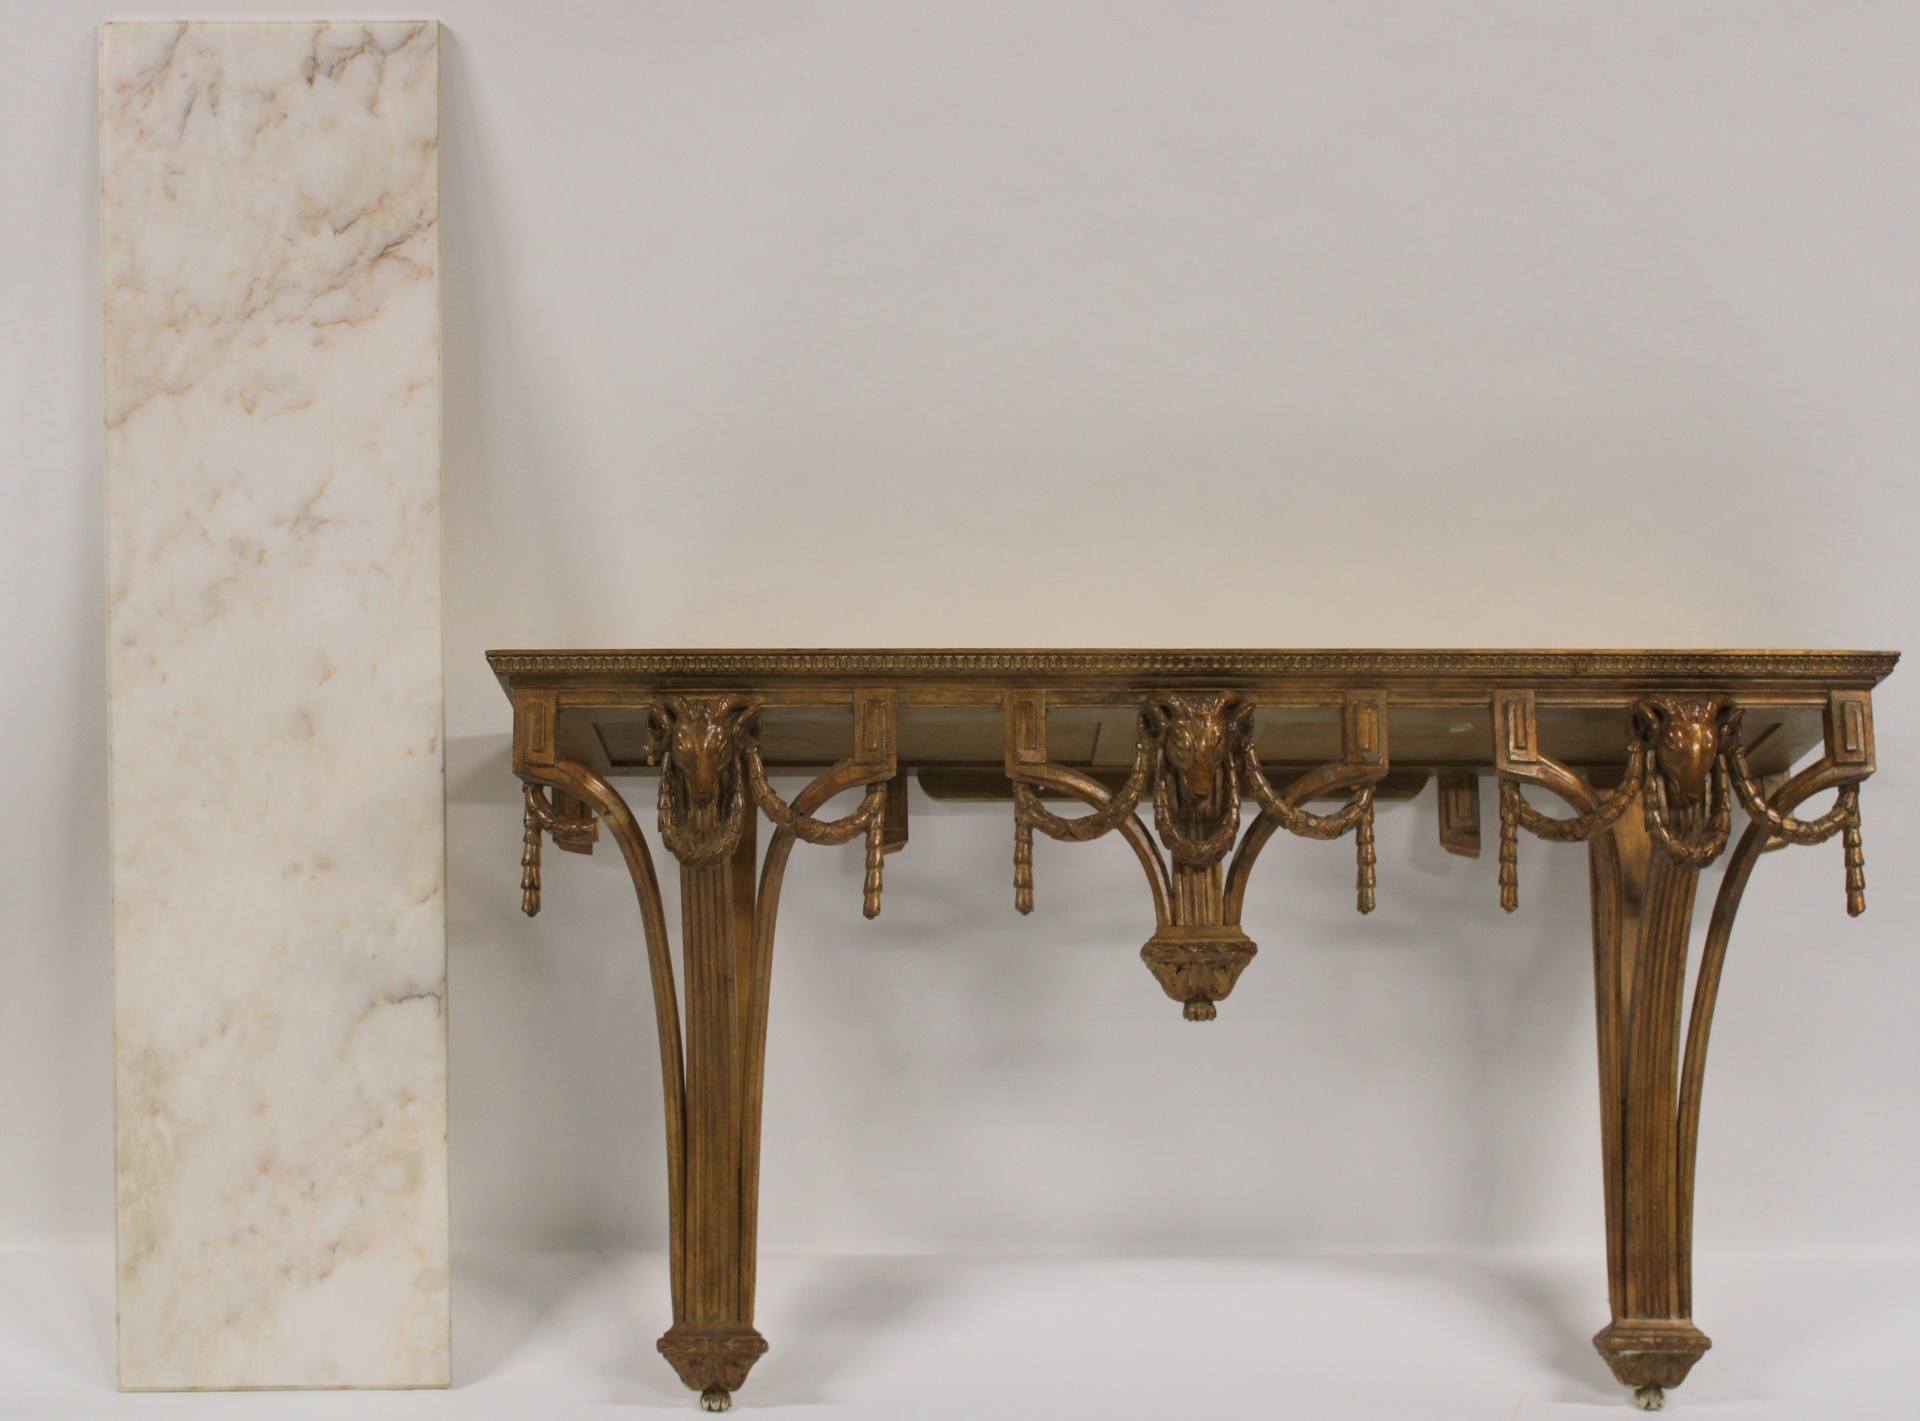 CARVED AND GILT DECORATED MARBLETOP